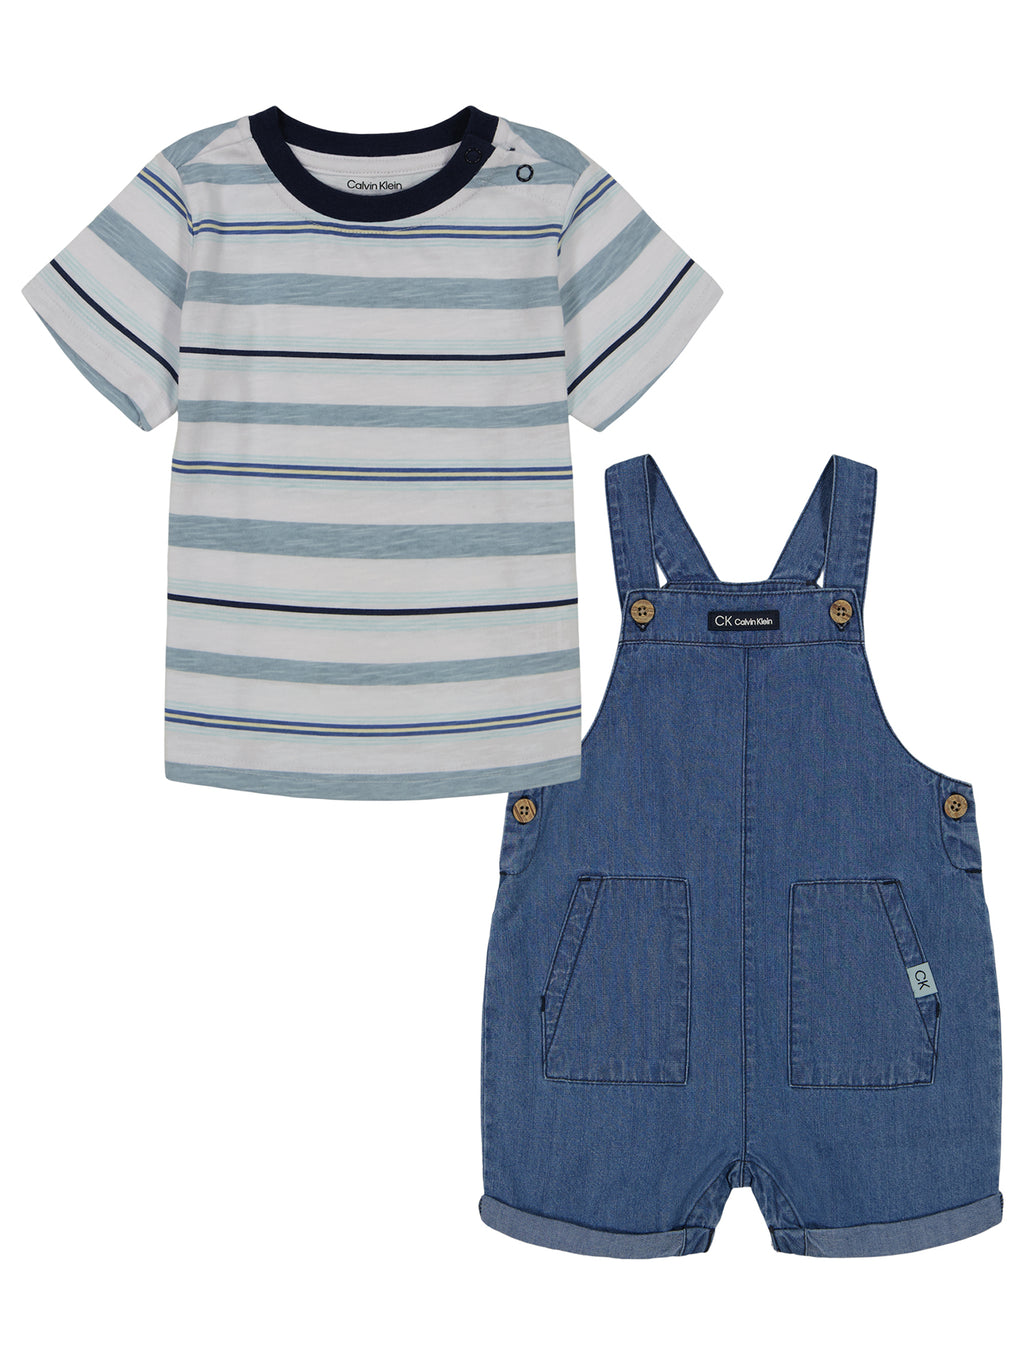 Baby Clothes & Accessories